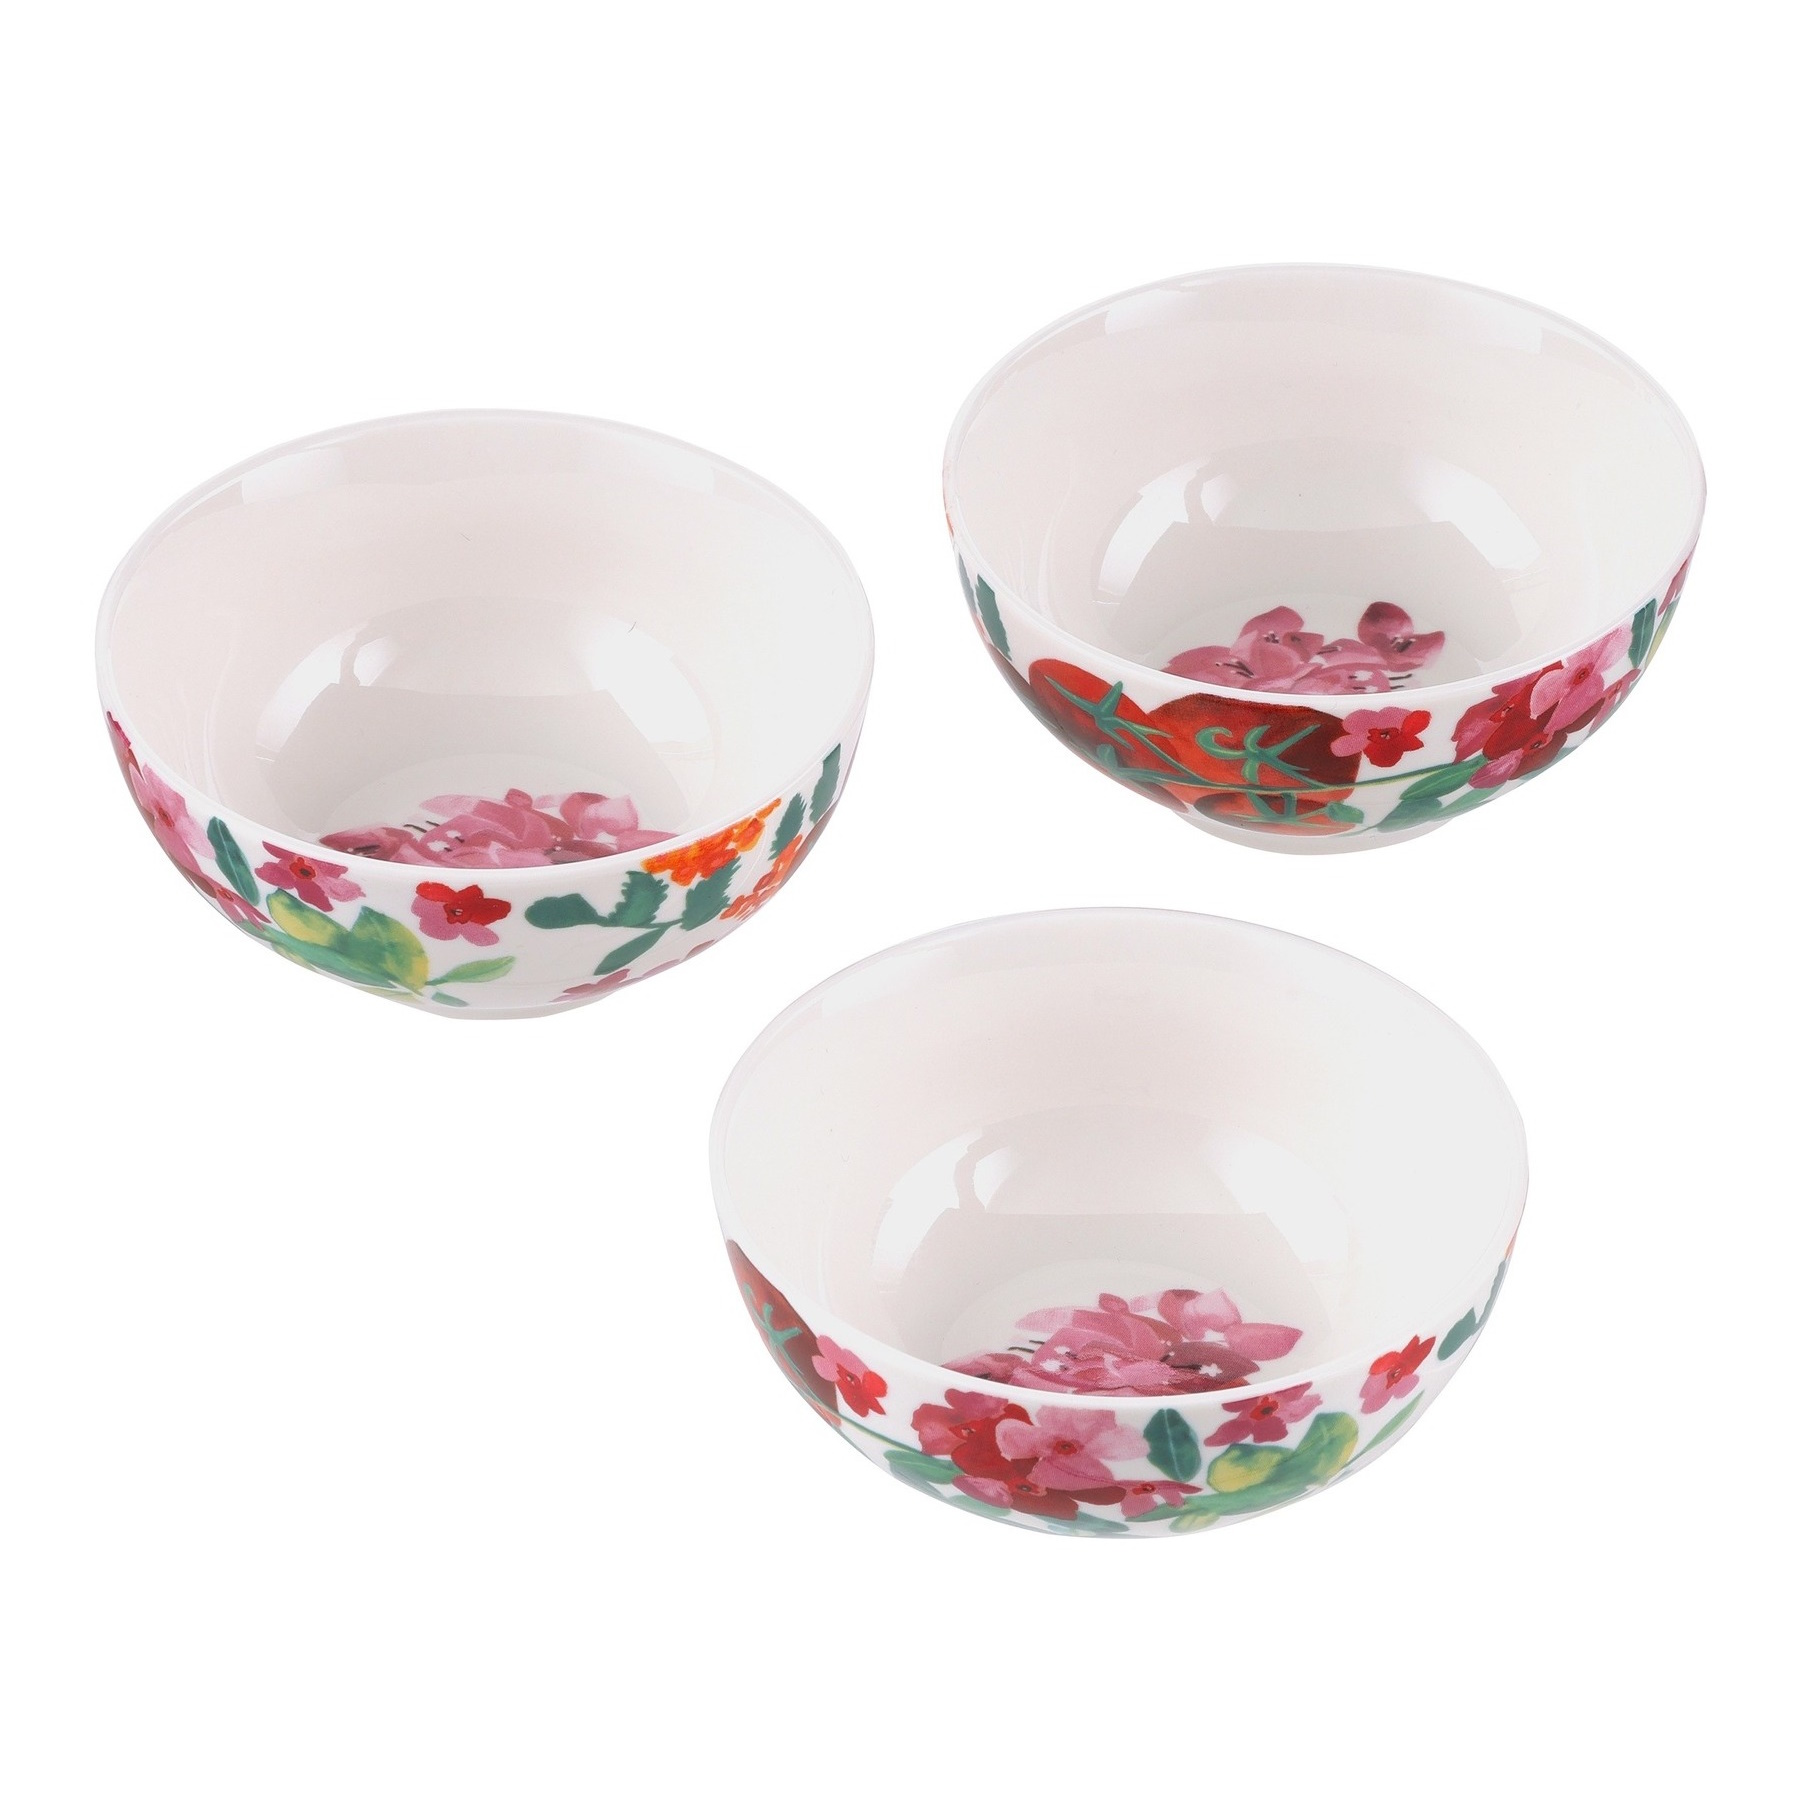 Maxwell & Williams Capri Coupe Bowl 10cm Set of 3 Gift Boxed